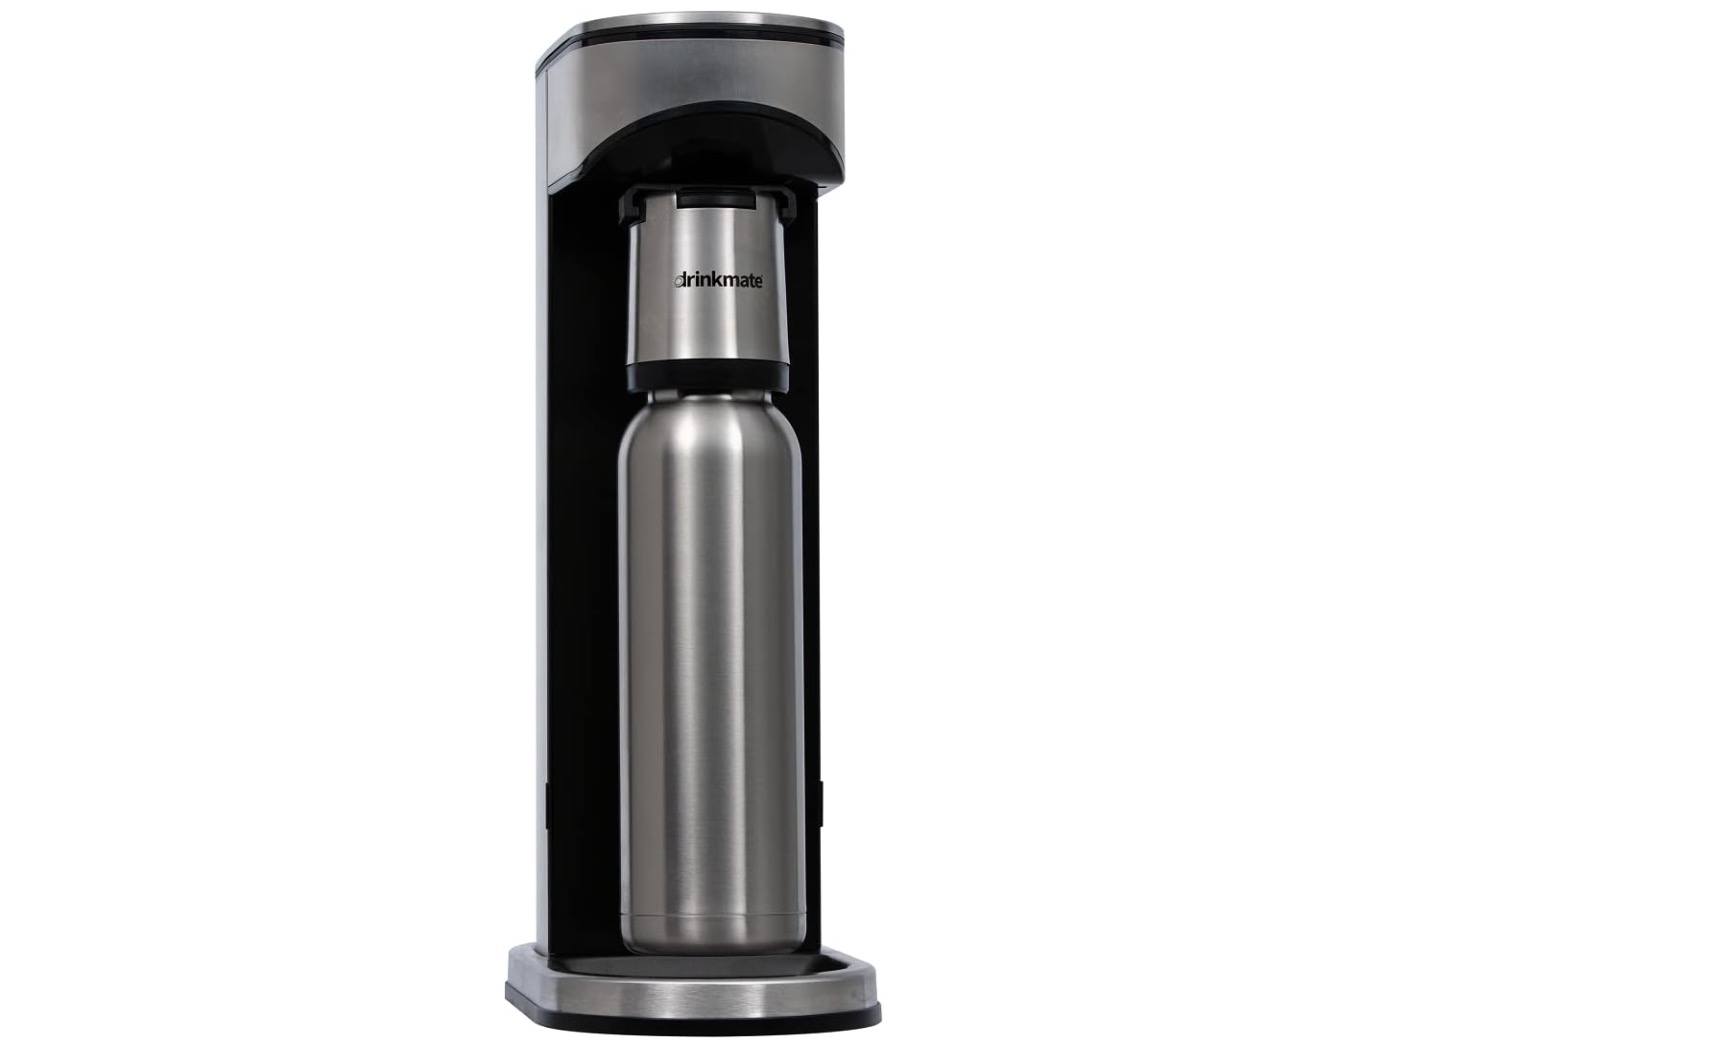 Soda maker brands: Drinkmate LUX Stainless Steel Sparkling Water and Soda Maker